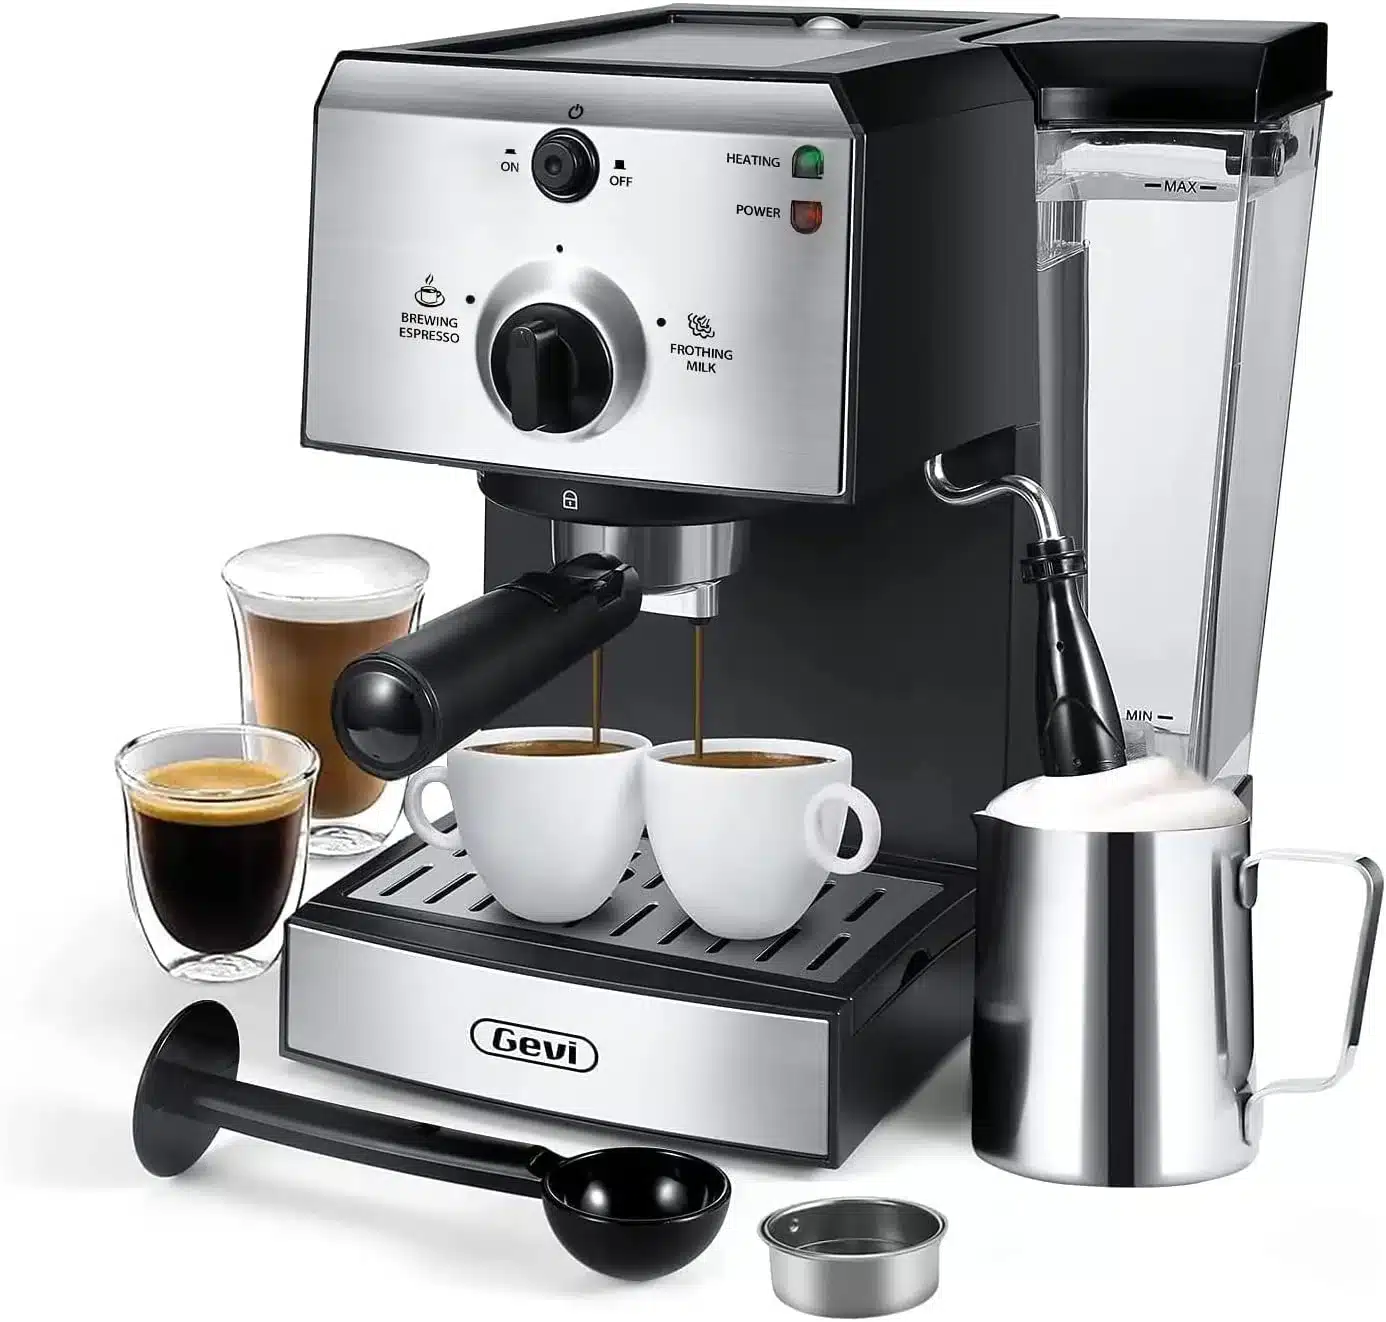 Gevi 15 Bar Professional Espresso Machine with Milk Frother and 1.5L Removable Water Tank